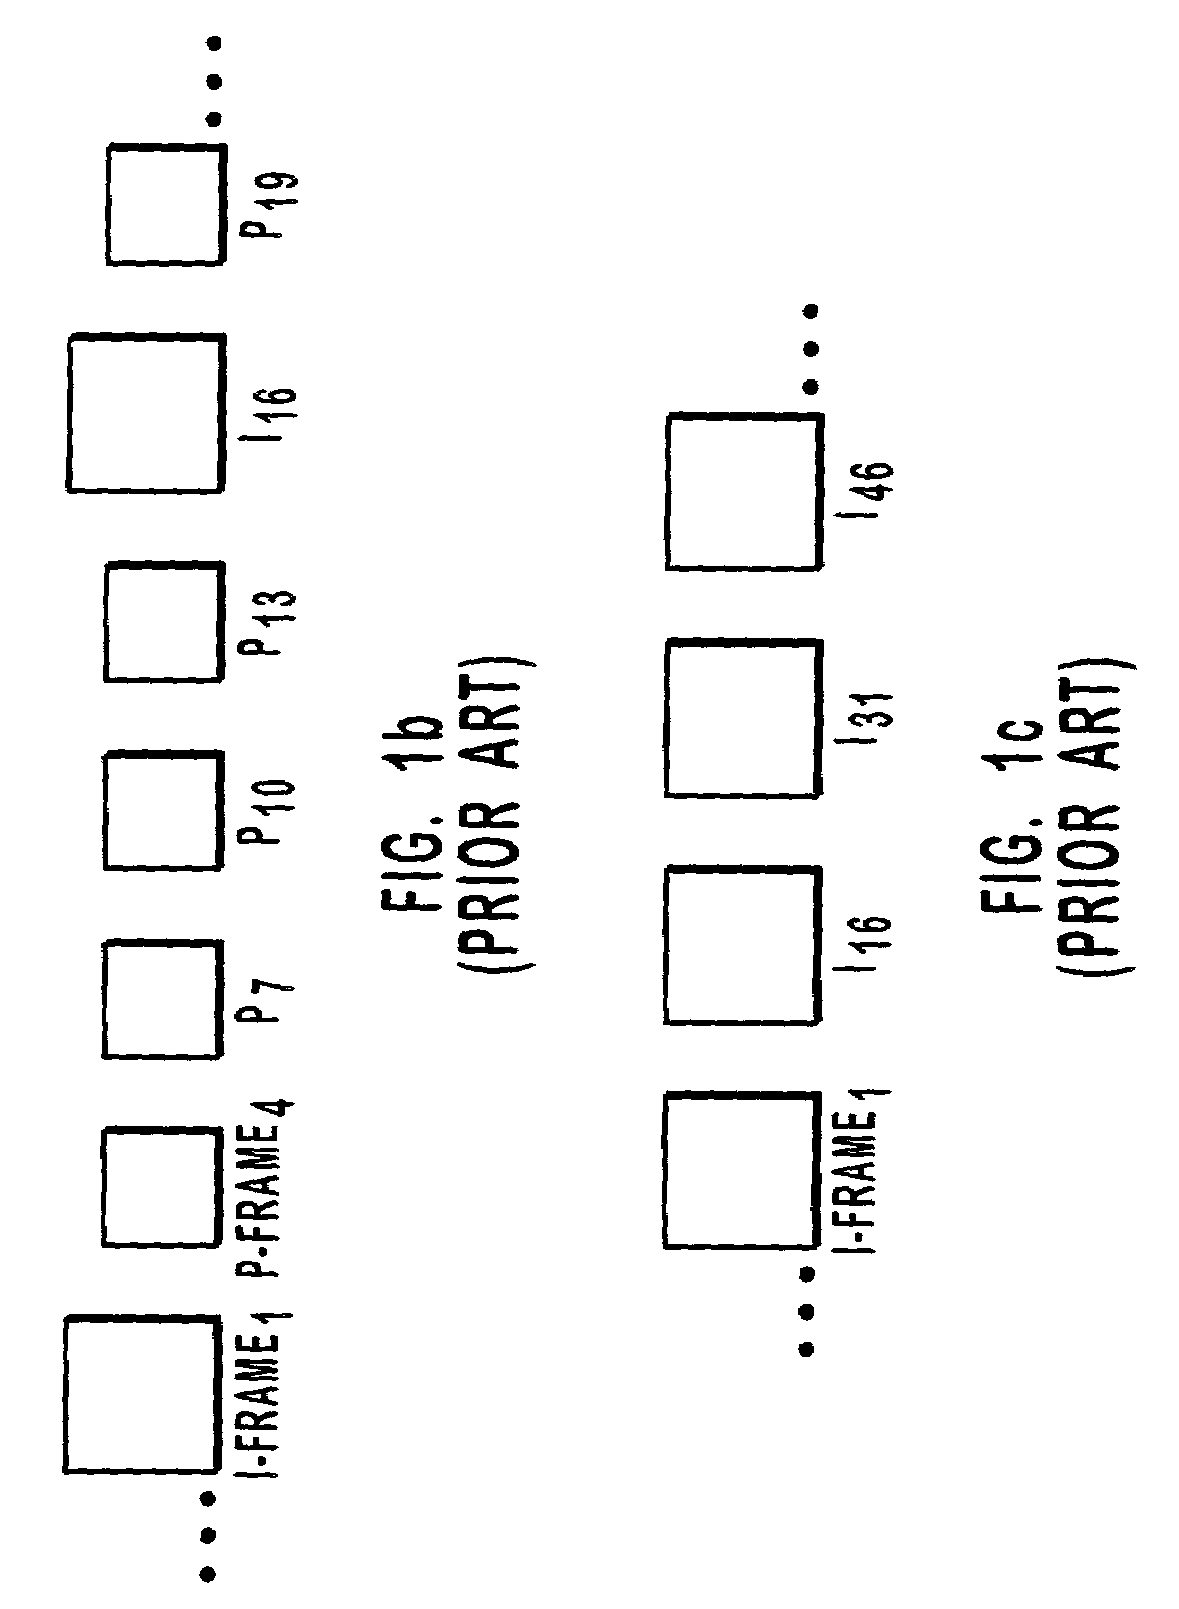 Systems and methods for playing digital video in reverse and fast forward modes